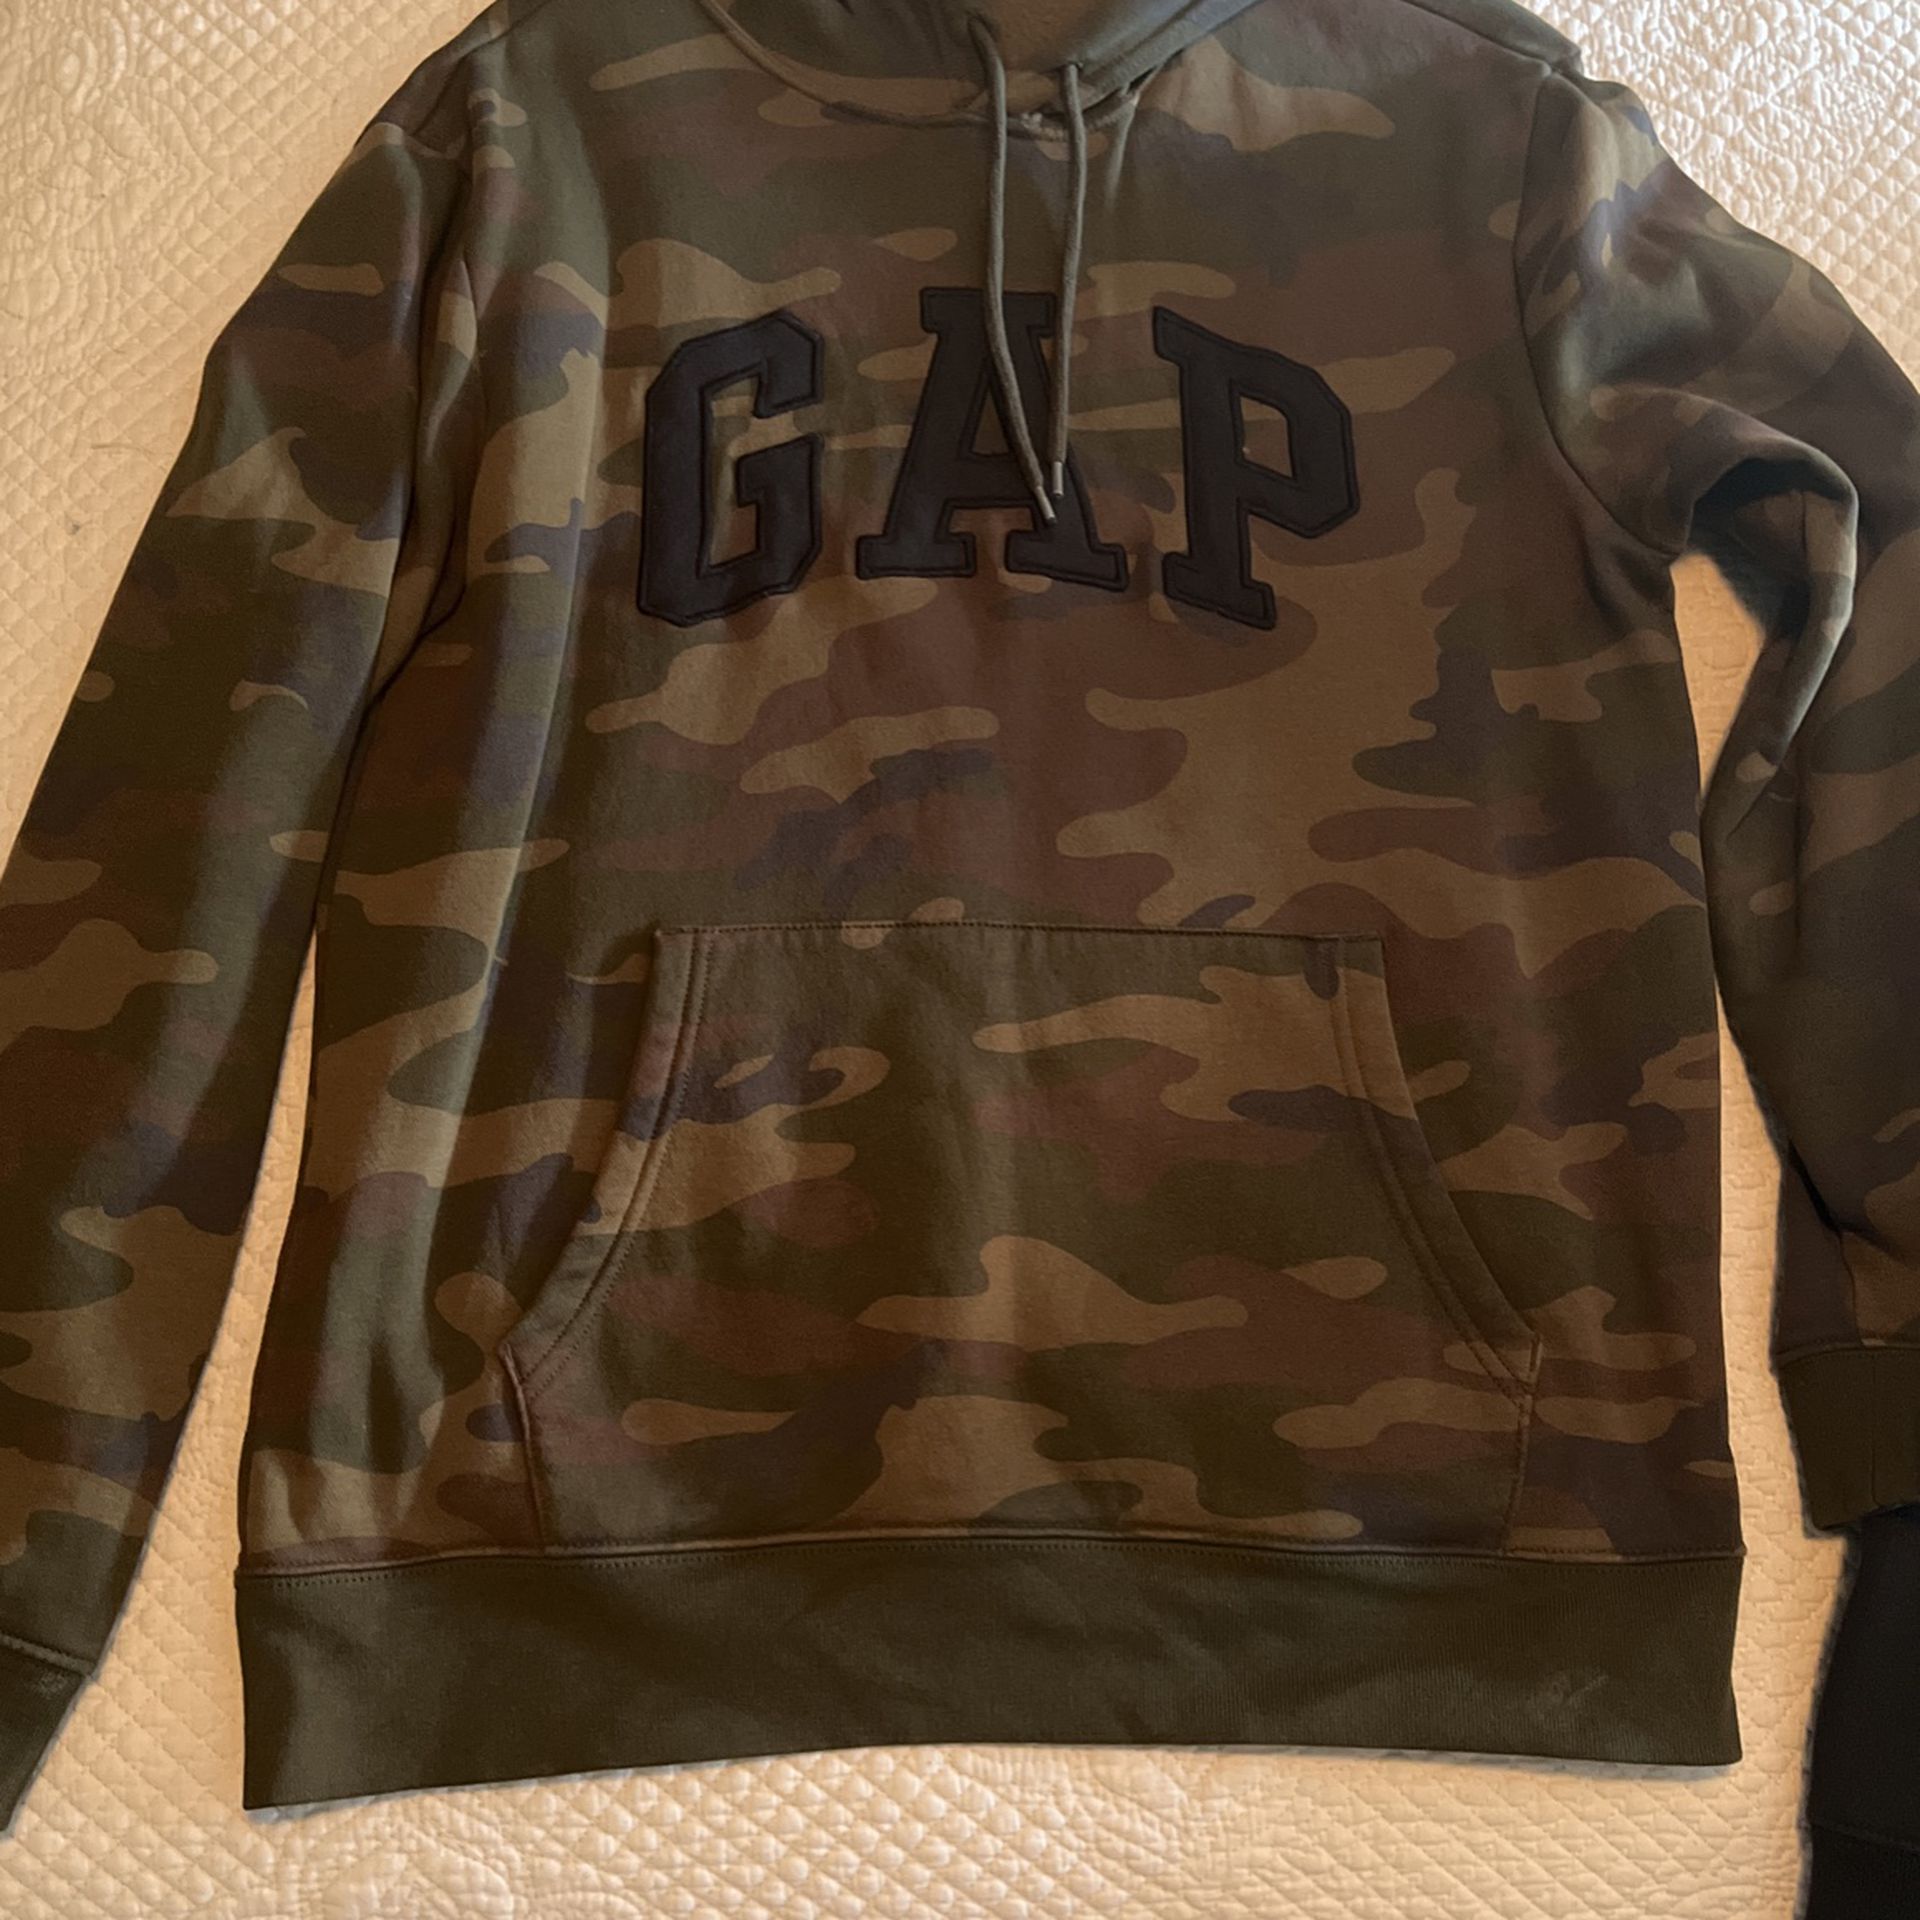 Army Color GAP hoodie in BOYS S Patterson, CA - OfferUp